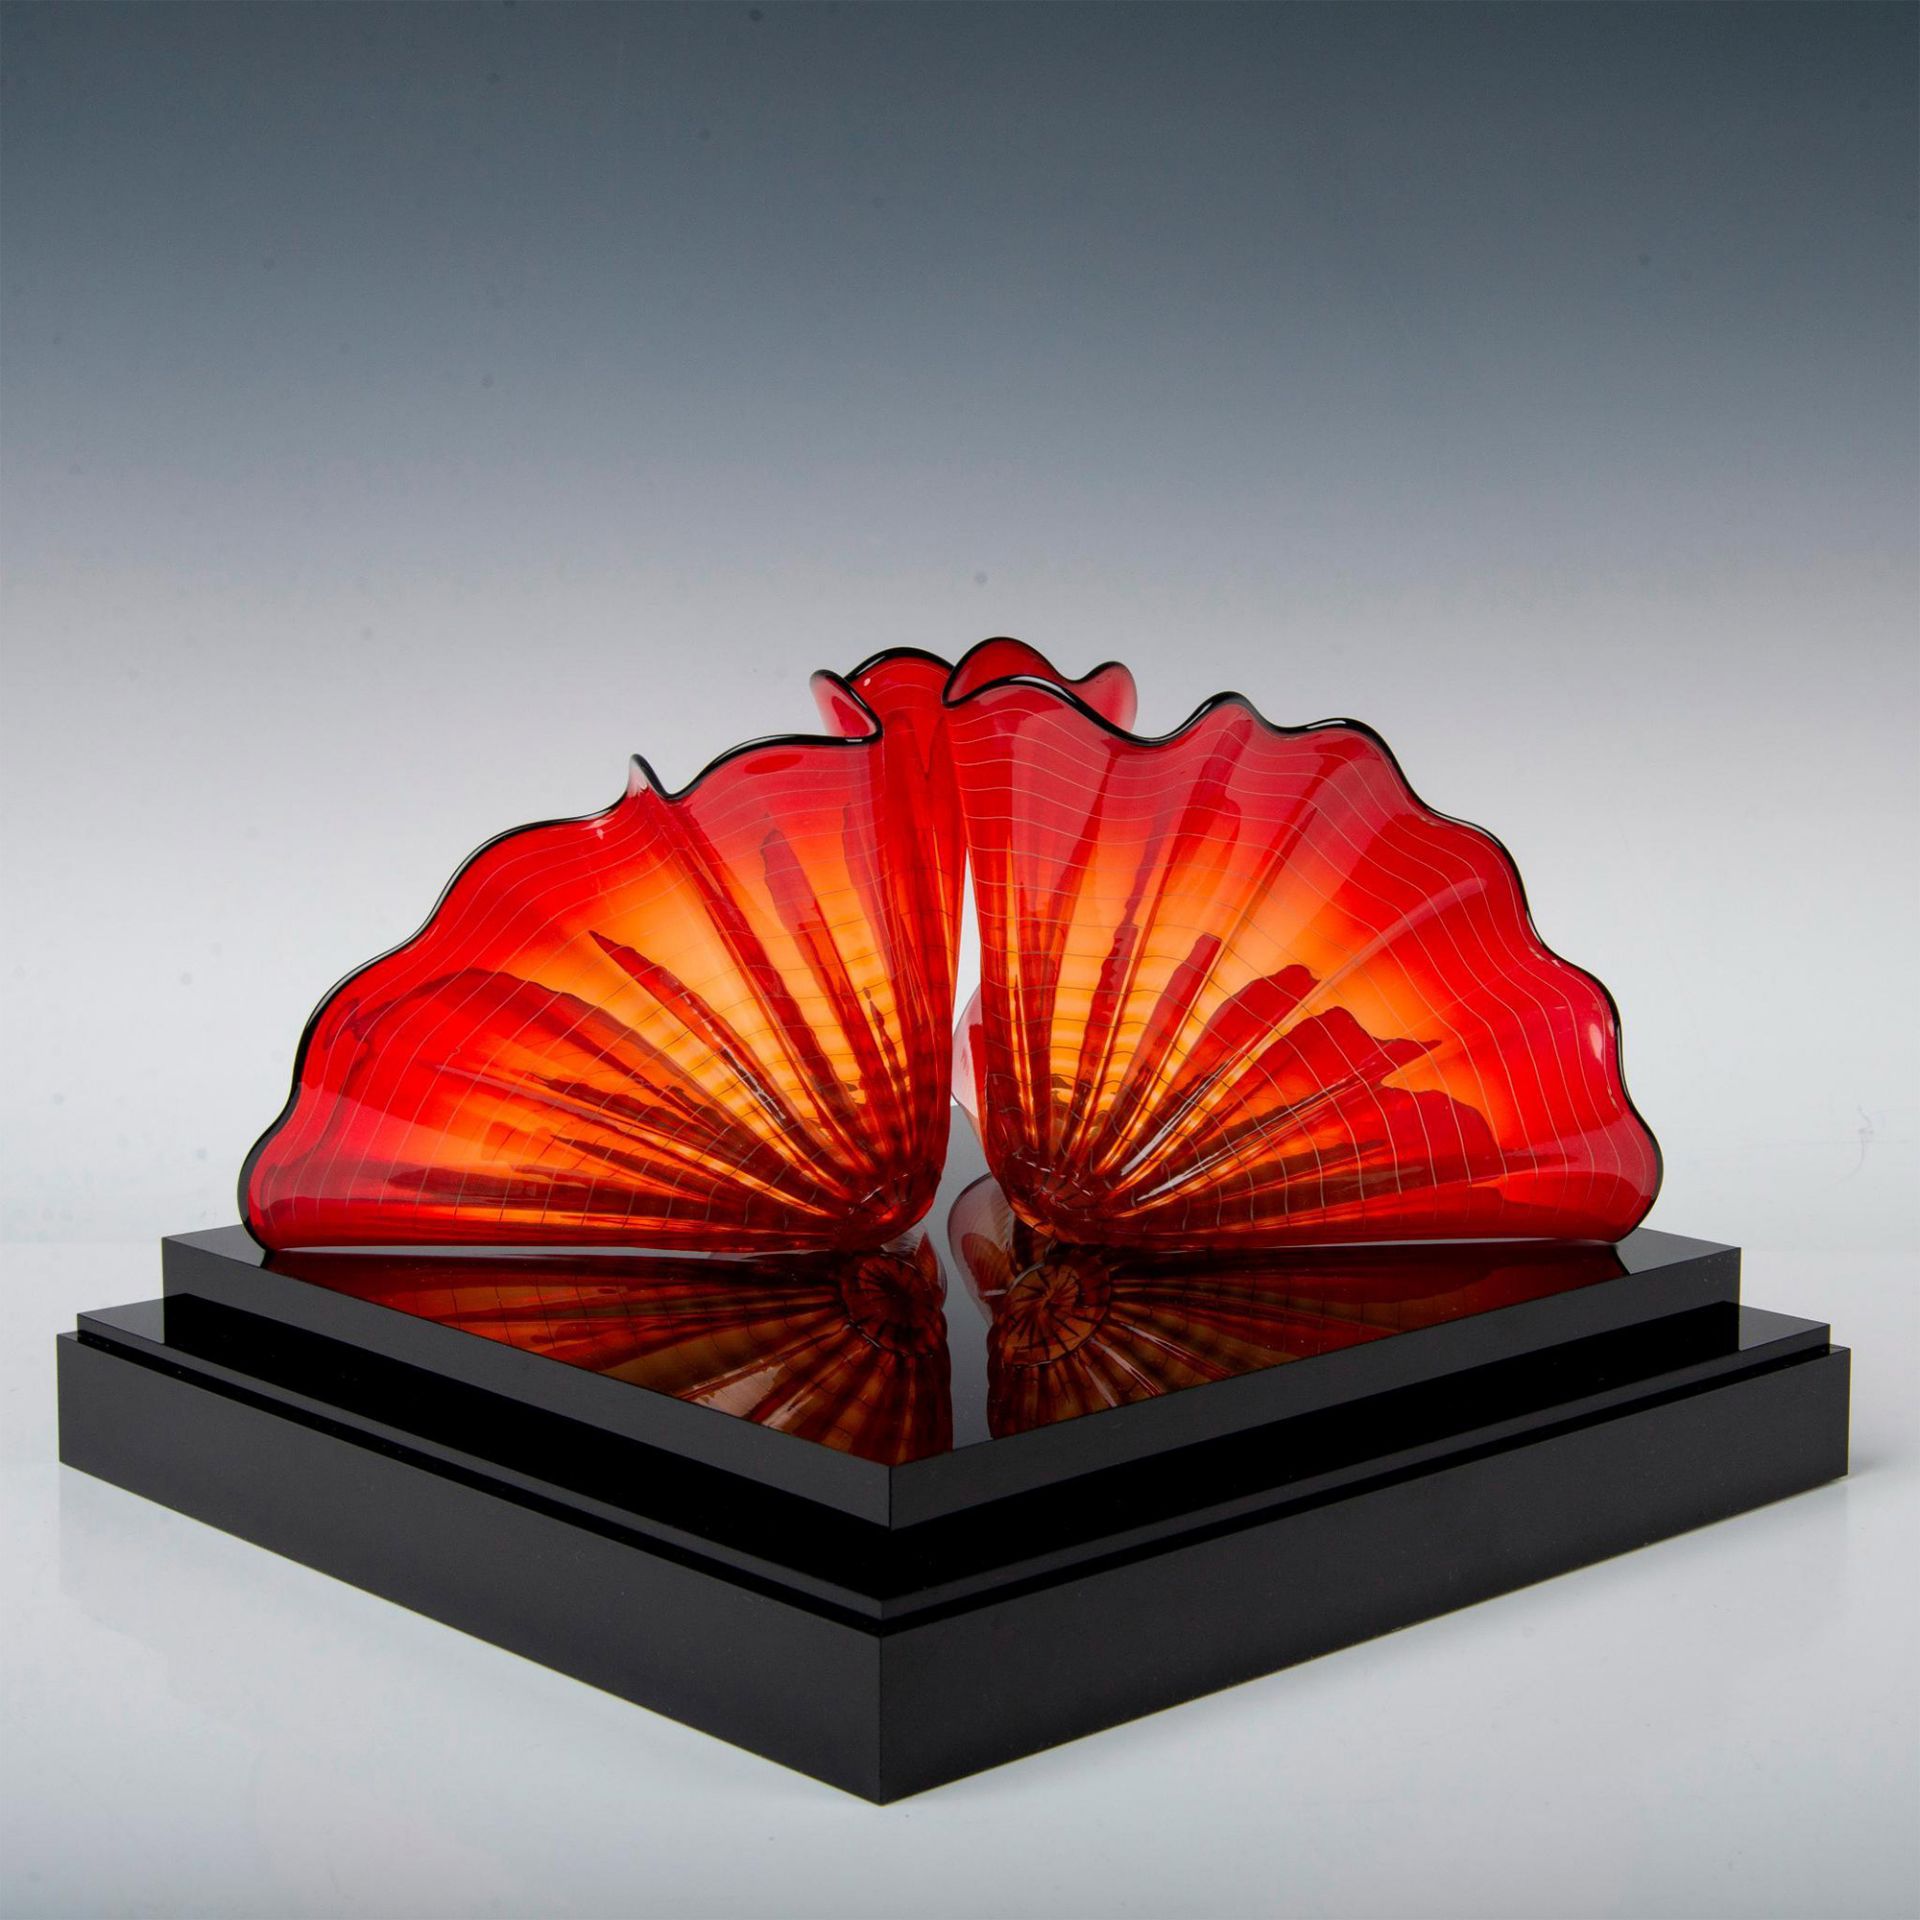 Dale Chihuly Portland Press Art Glass, Red Amber Persian Pair - Image 9 of 20